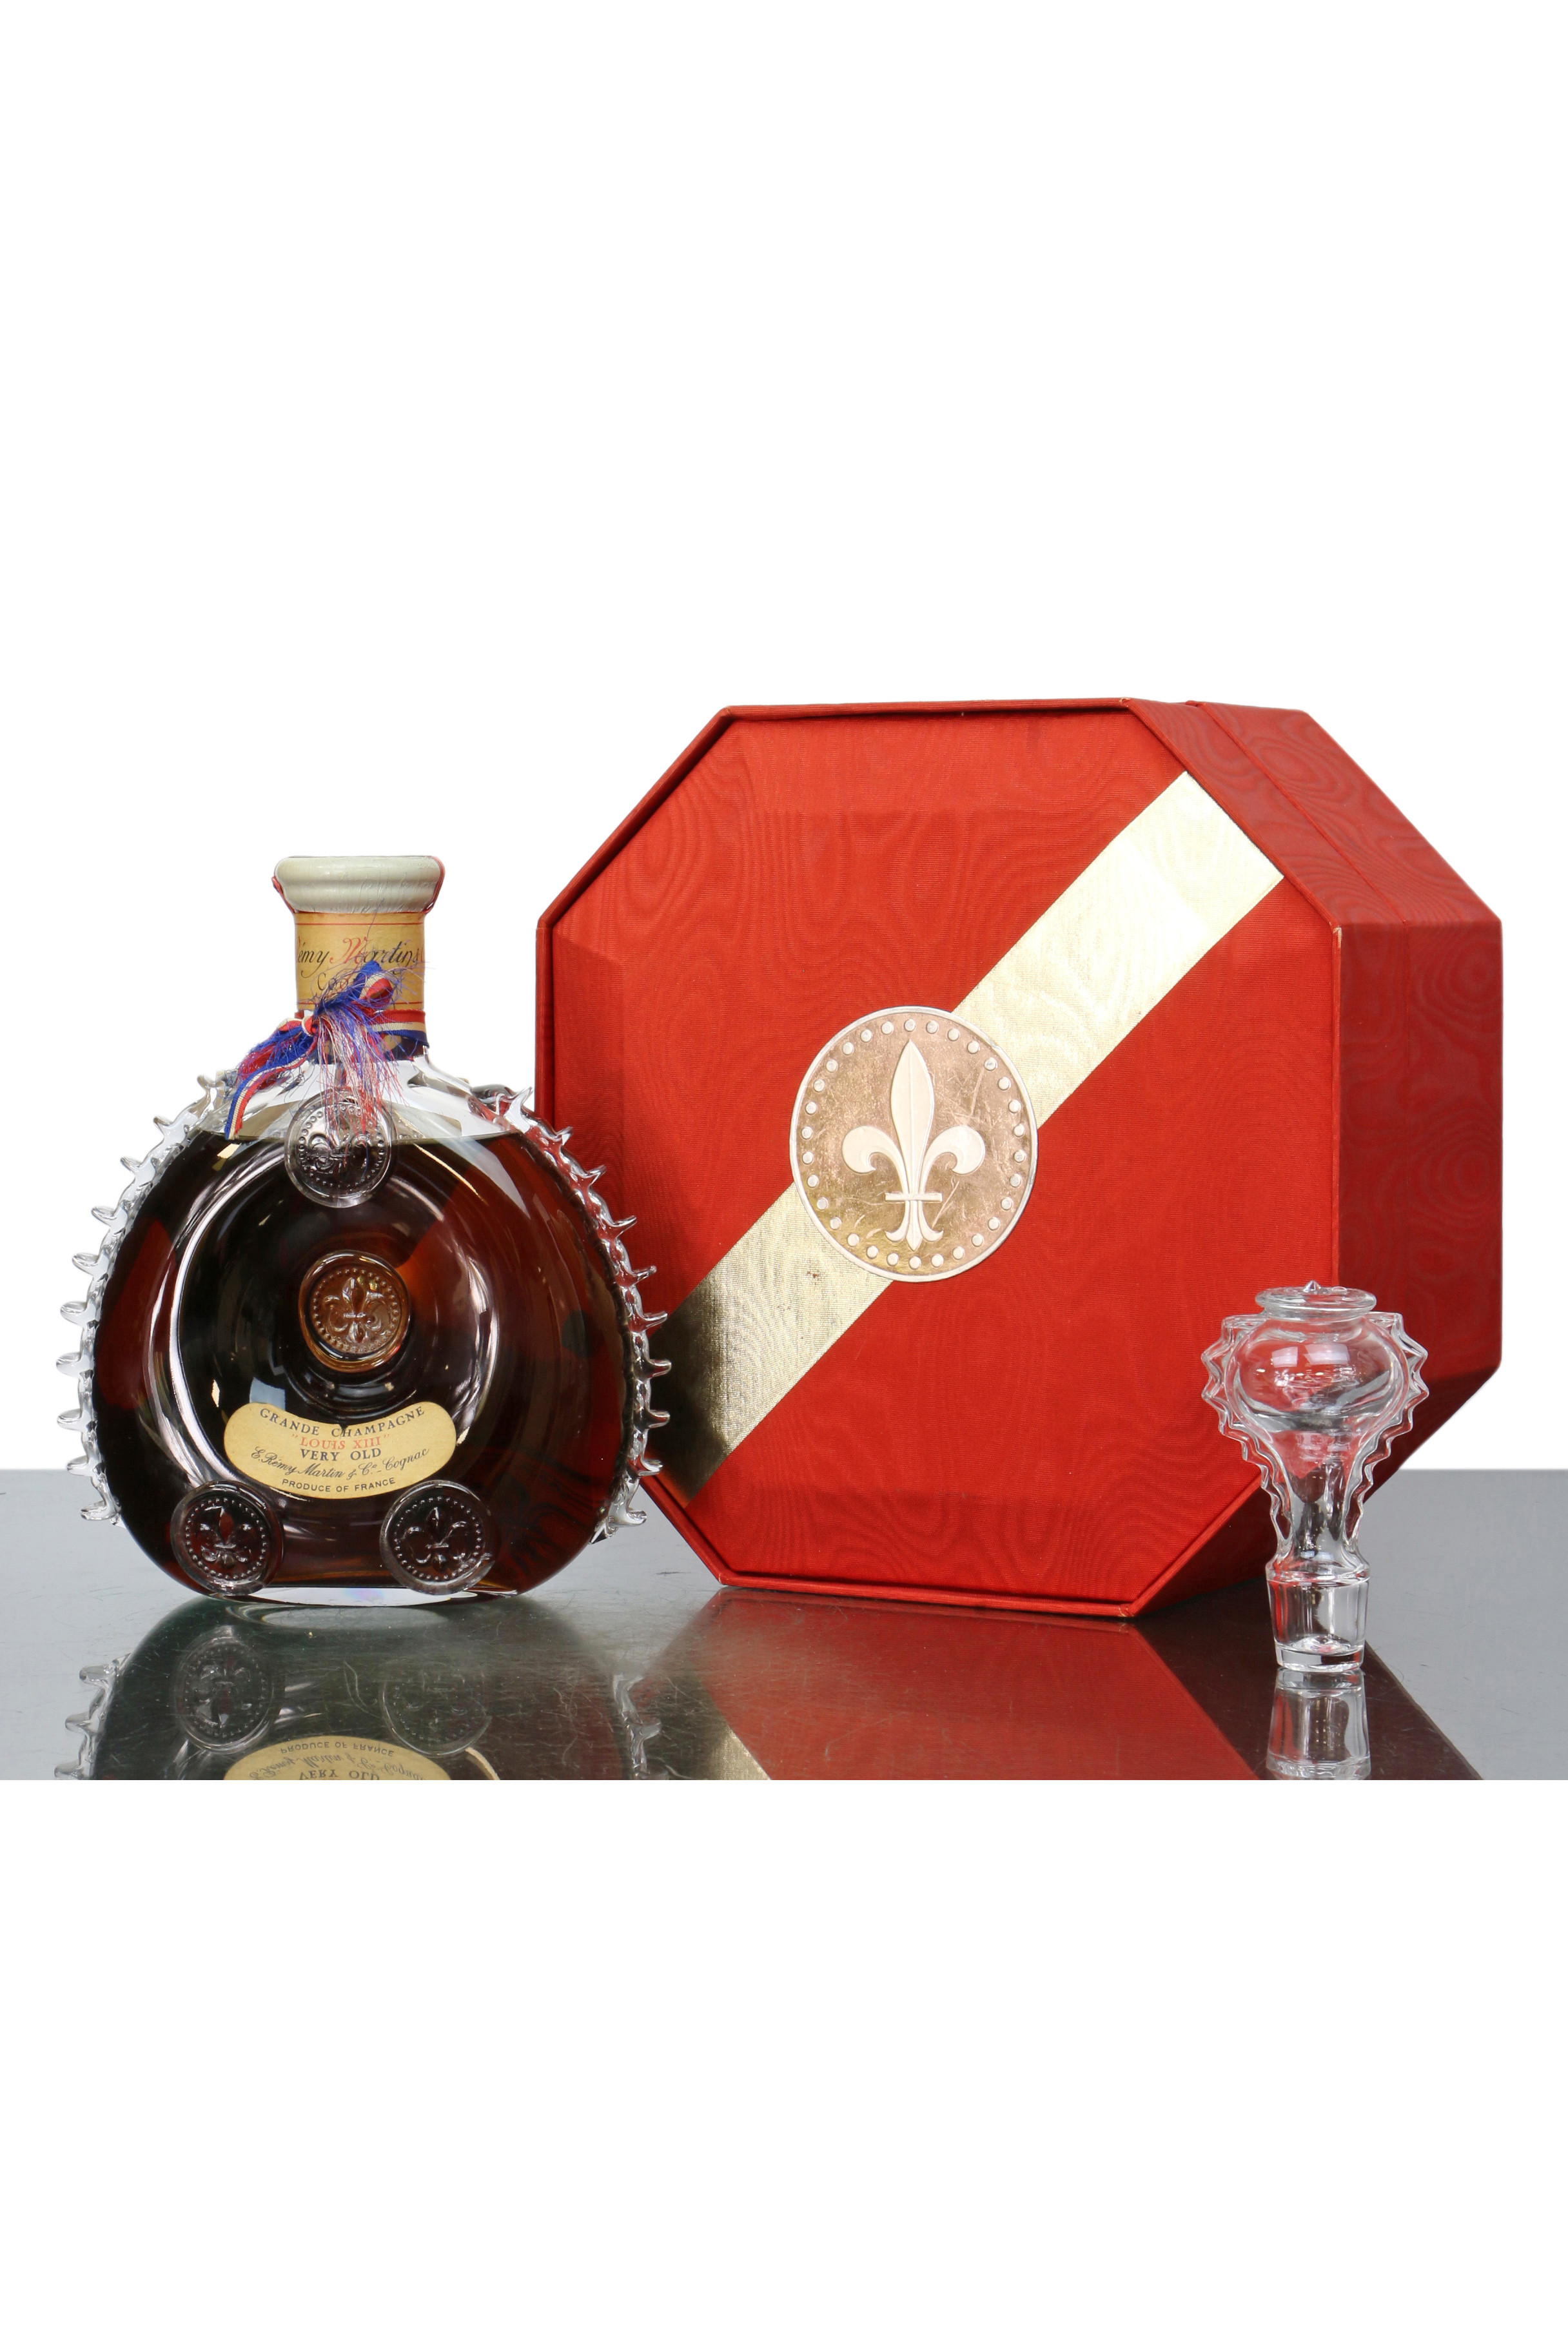 REMY MARTIN LOUIS XIII COGNAC BACCARAT CRYSTAL DECANTER BOTTLE EMPTY with  BOX